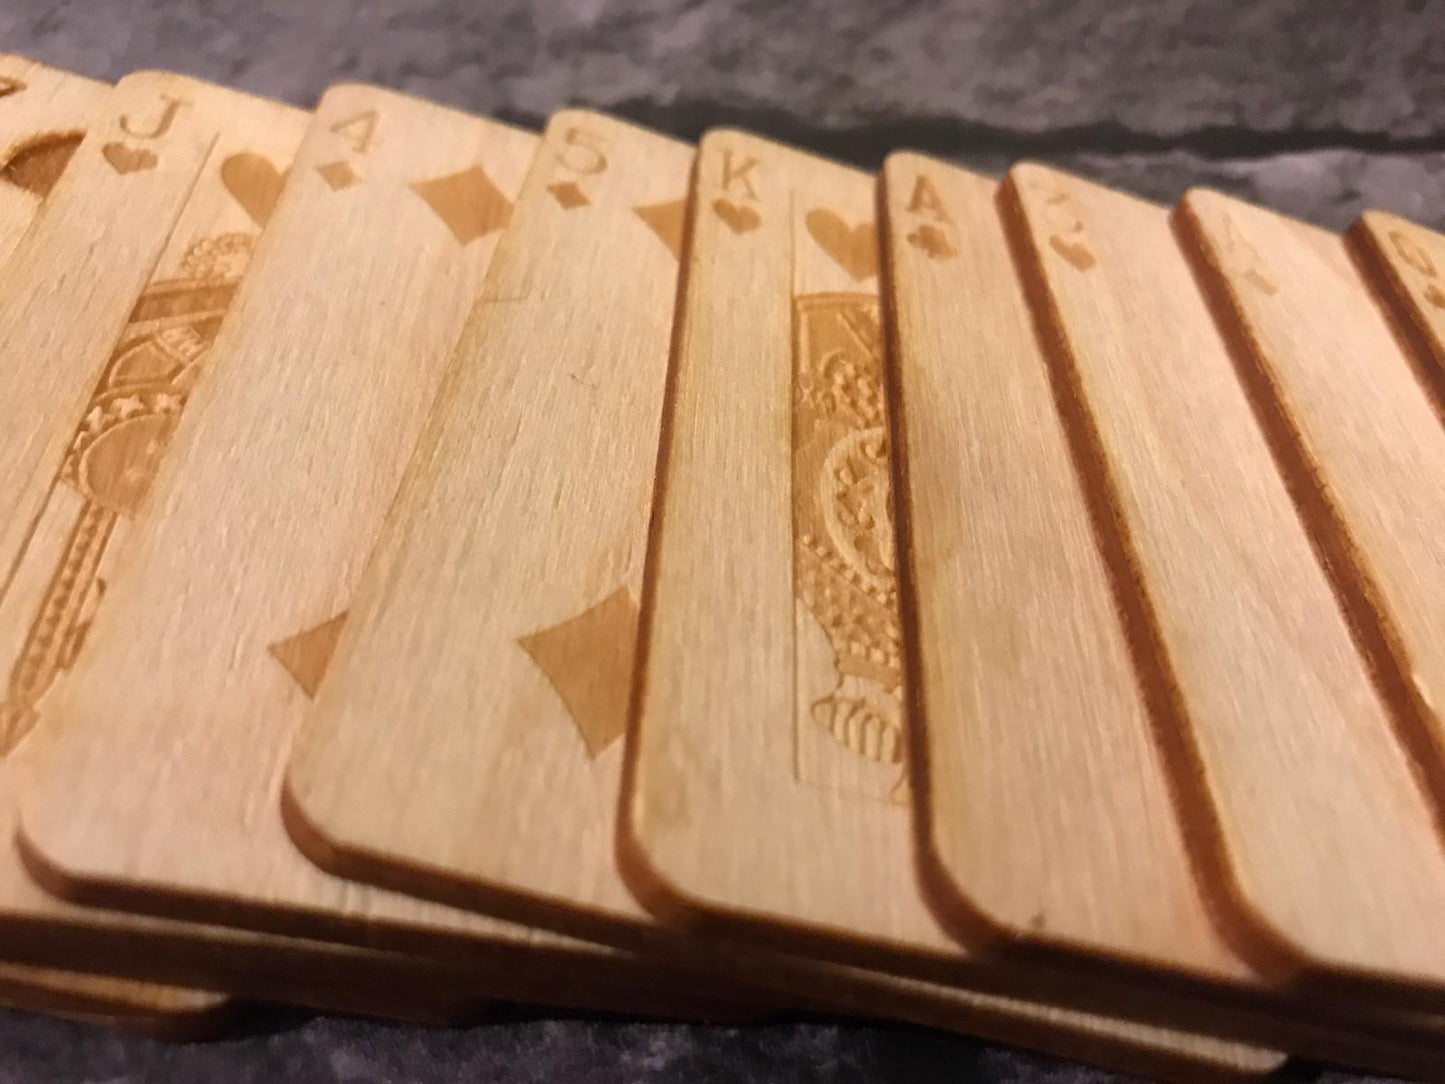 Wooden Playing Card Deck